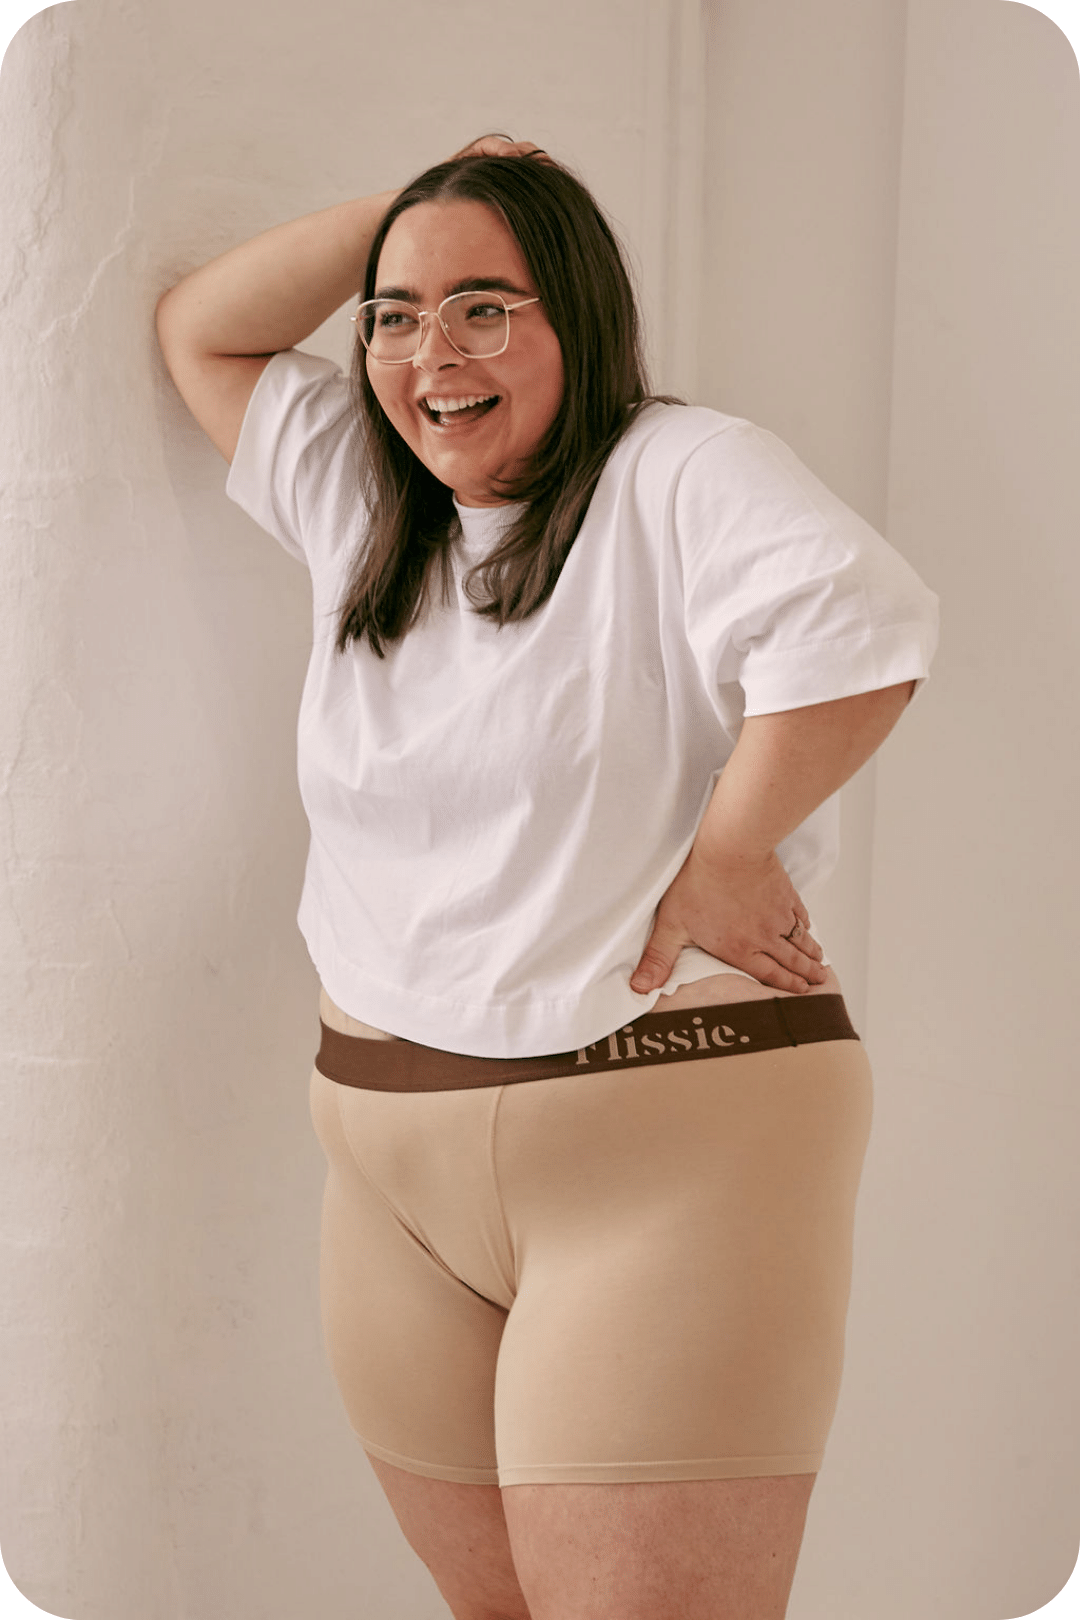 Flissie womens boxers in Fawn Brown